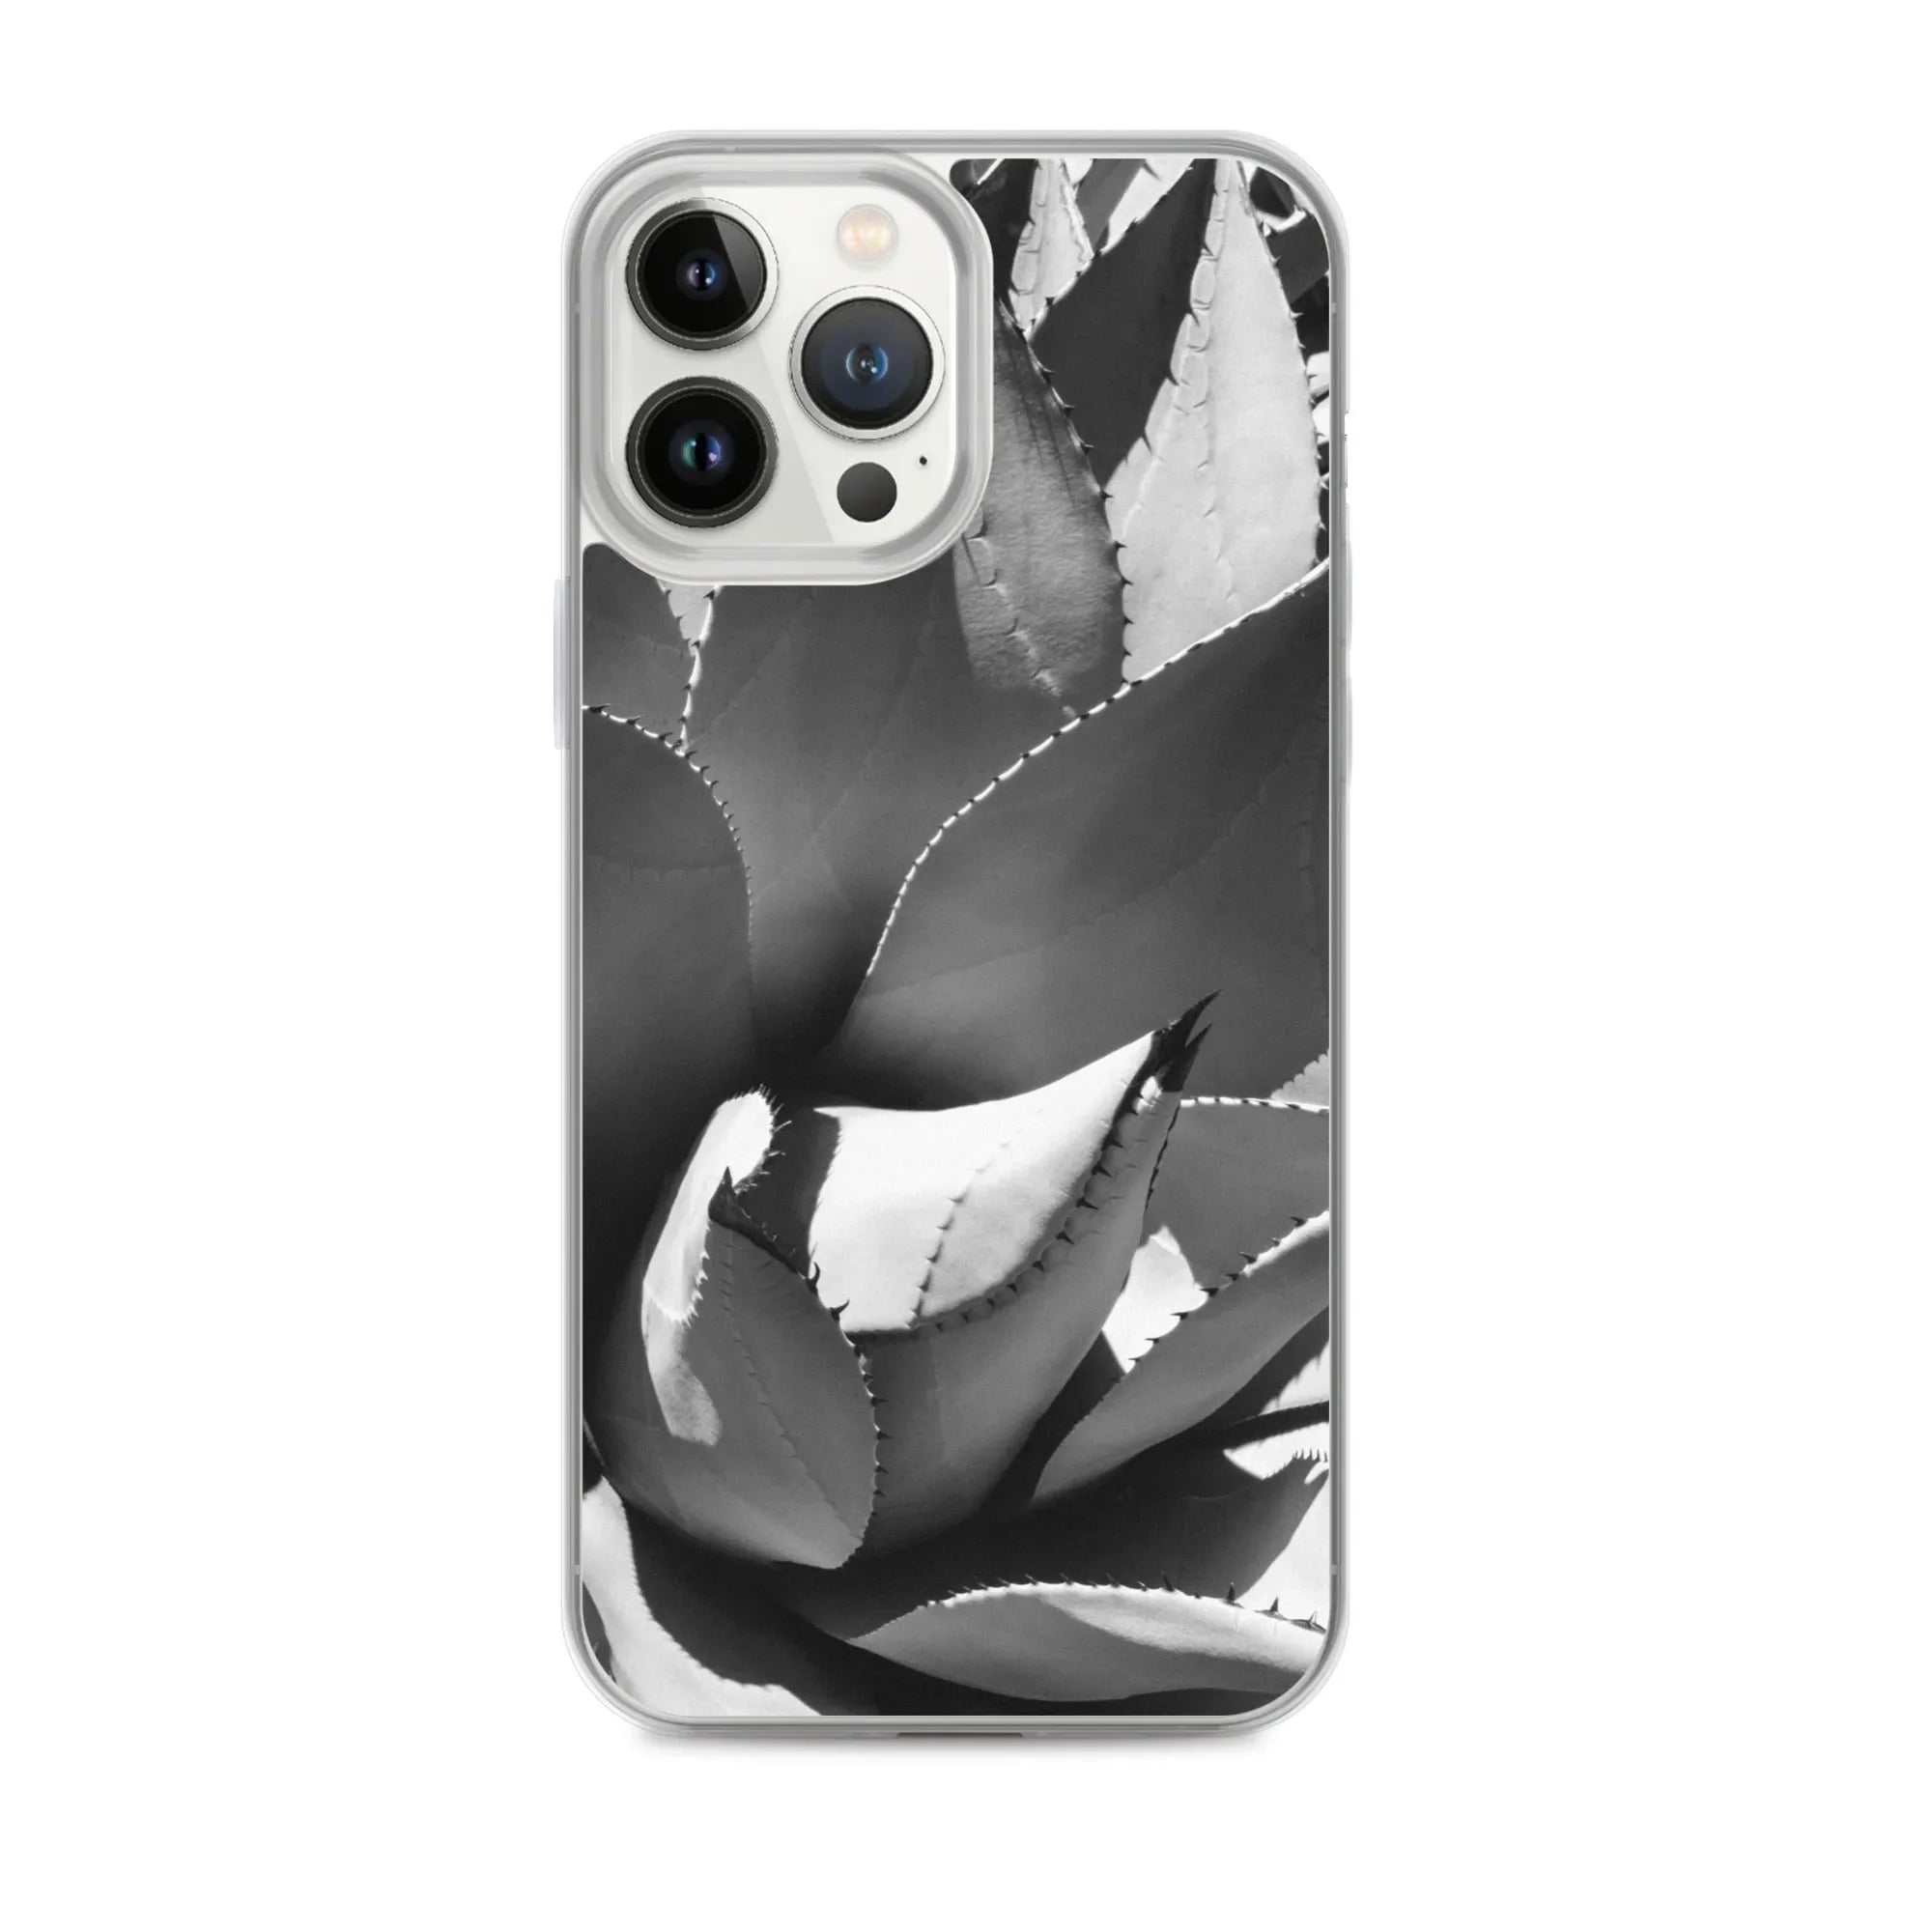 Open Wide Botanical Art Iphone Case - Black And White - Iphone 13 Pro Max - Mobile Phone Cases - Aesthetic Art